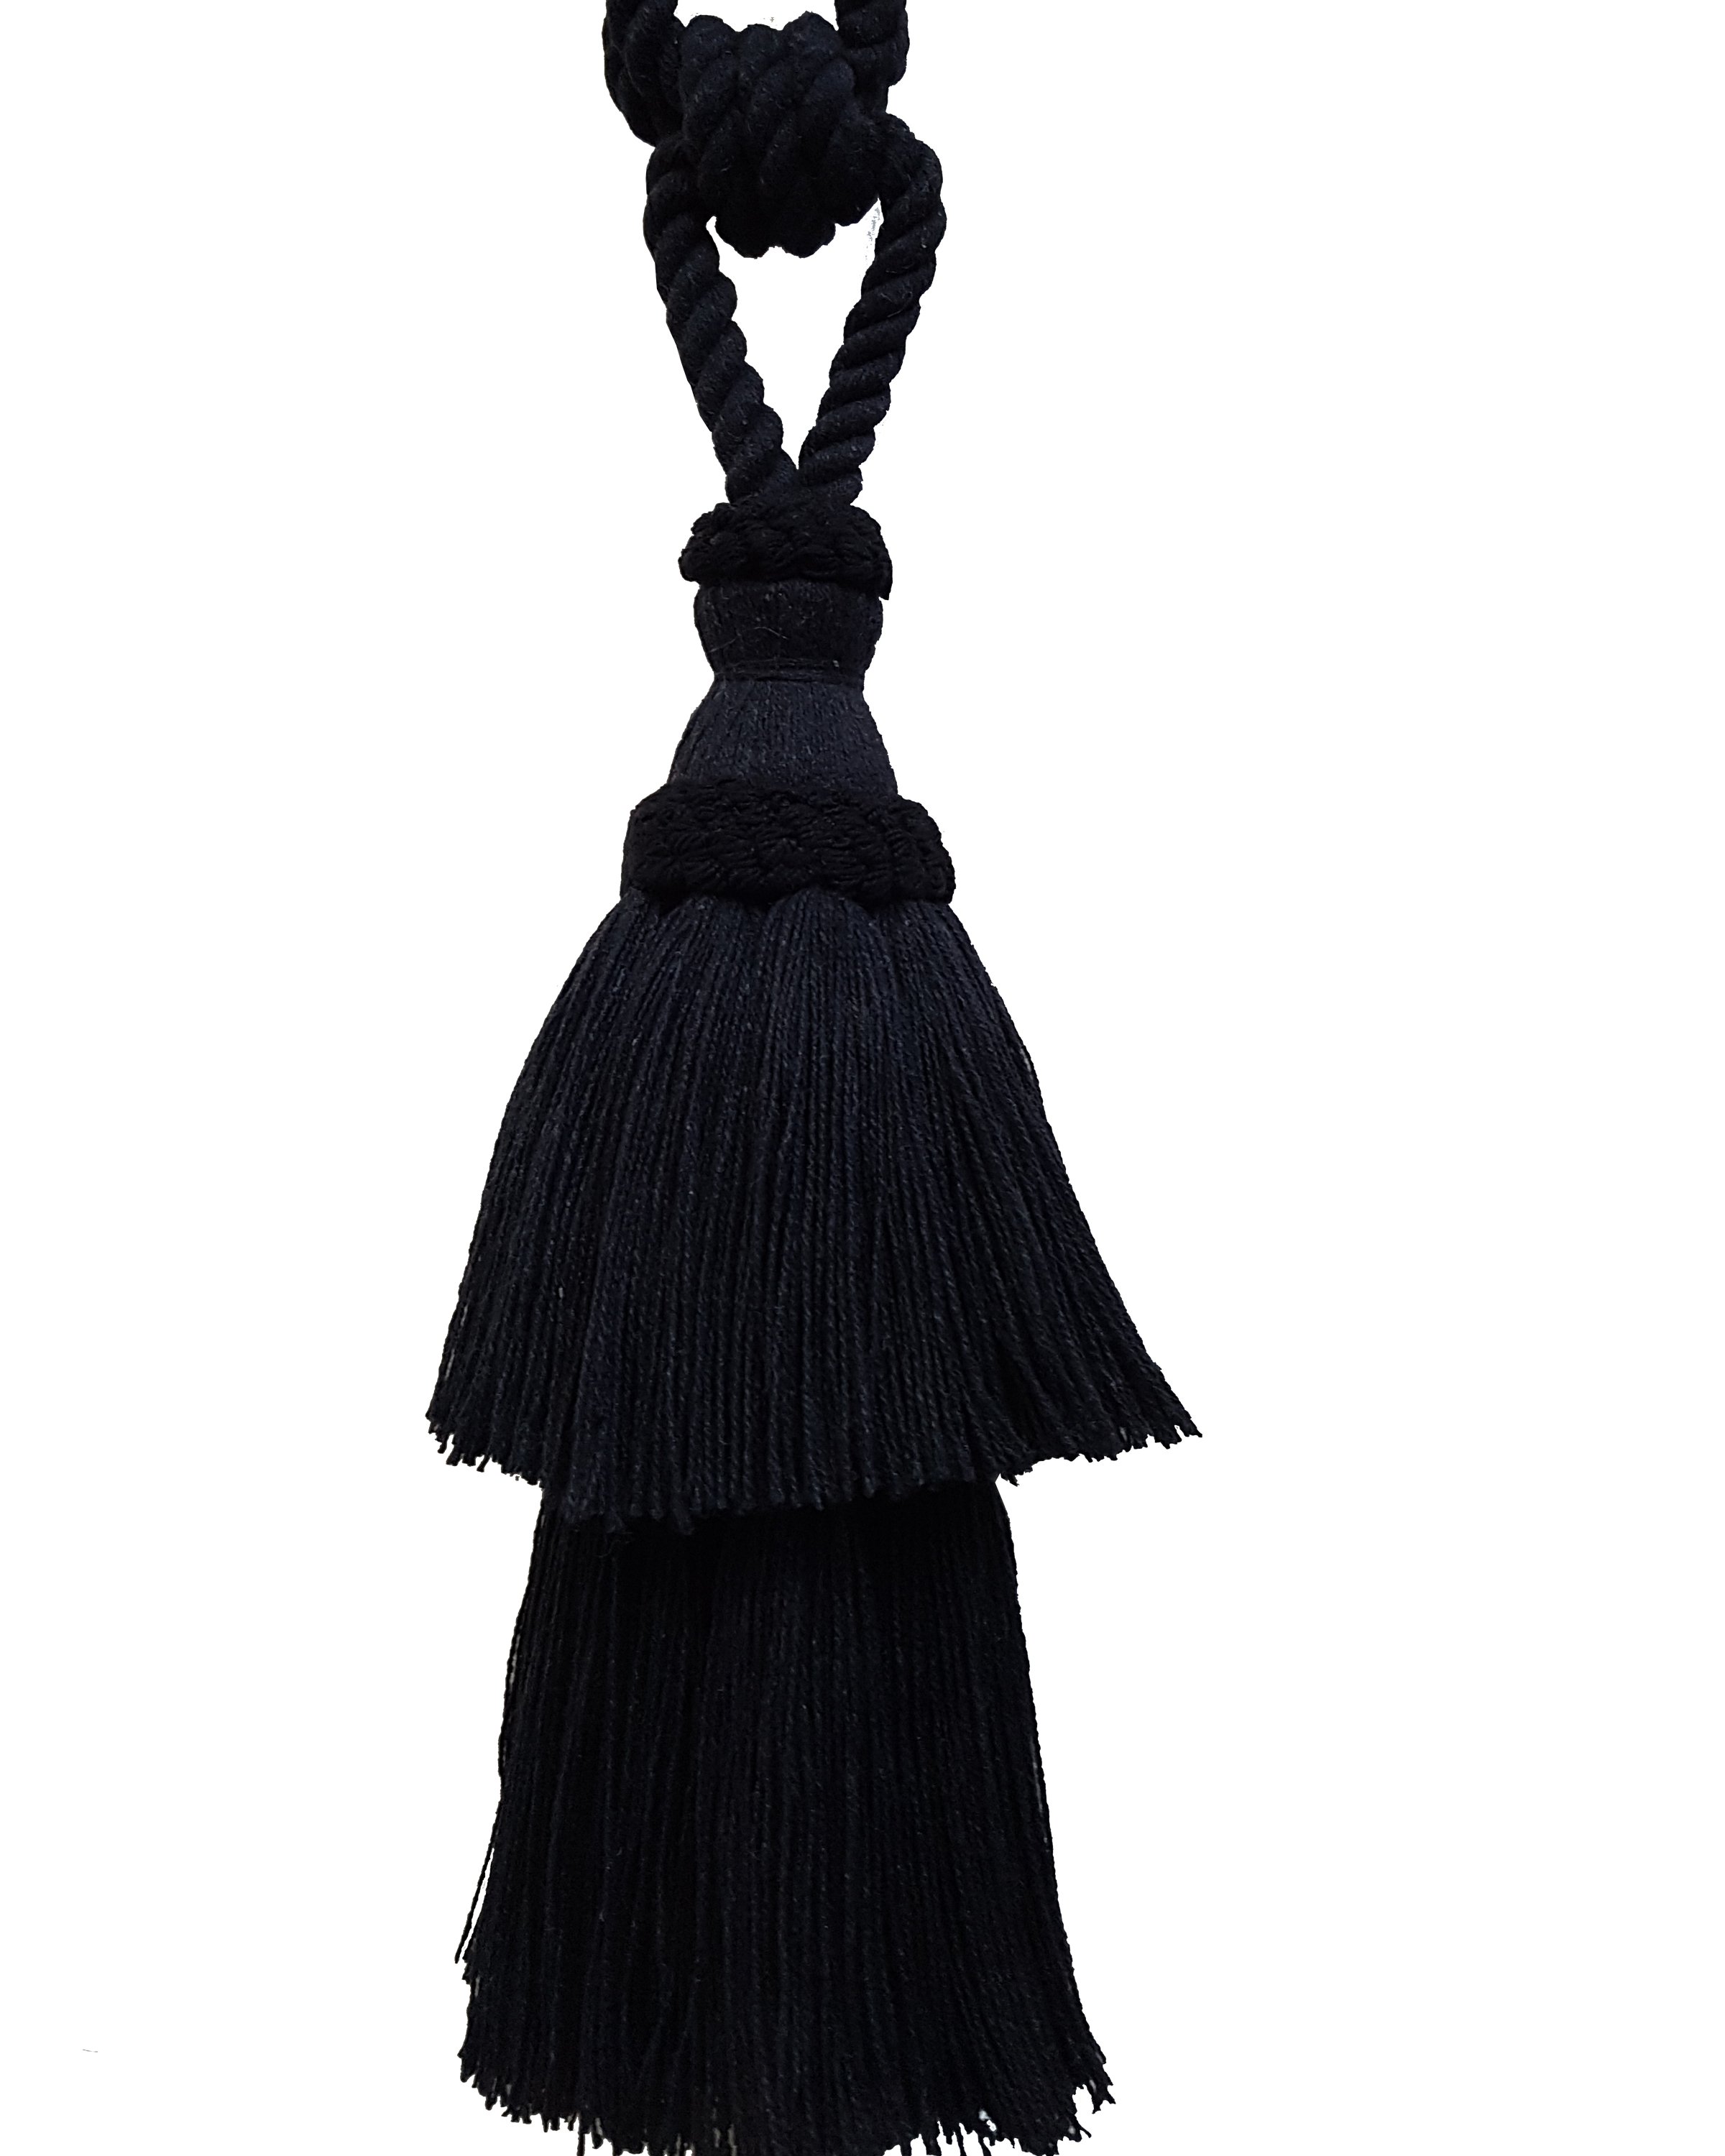 PAIR Natural Cotton Curtain Tie Back with tassel - BLACK 24 cm